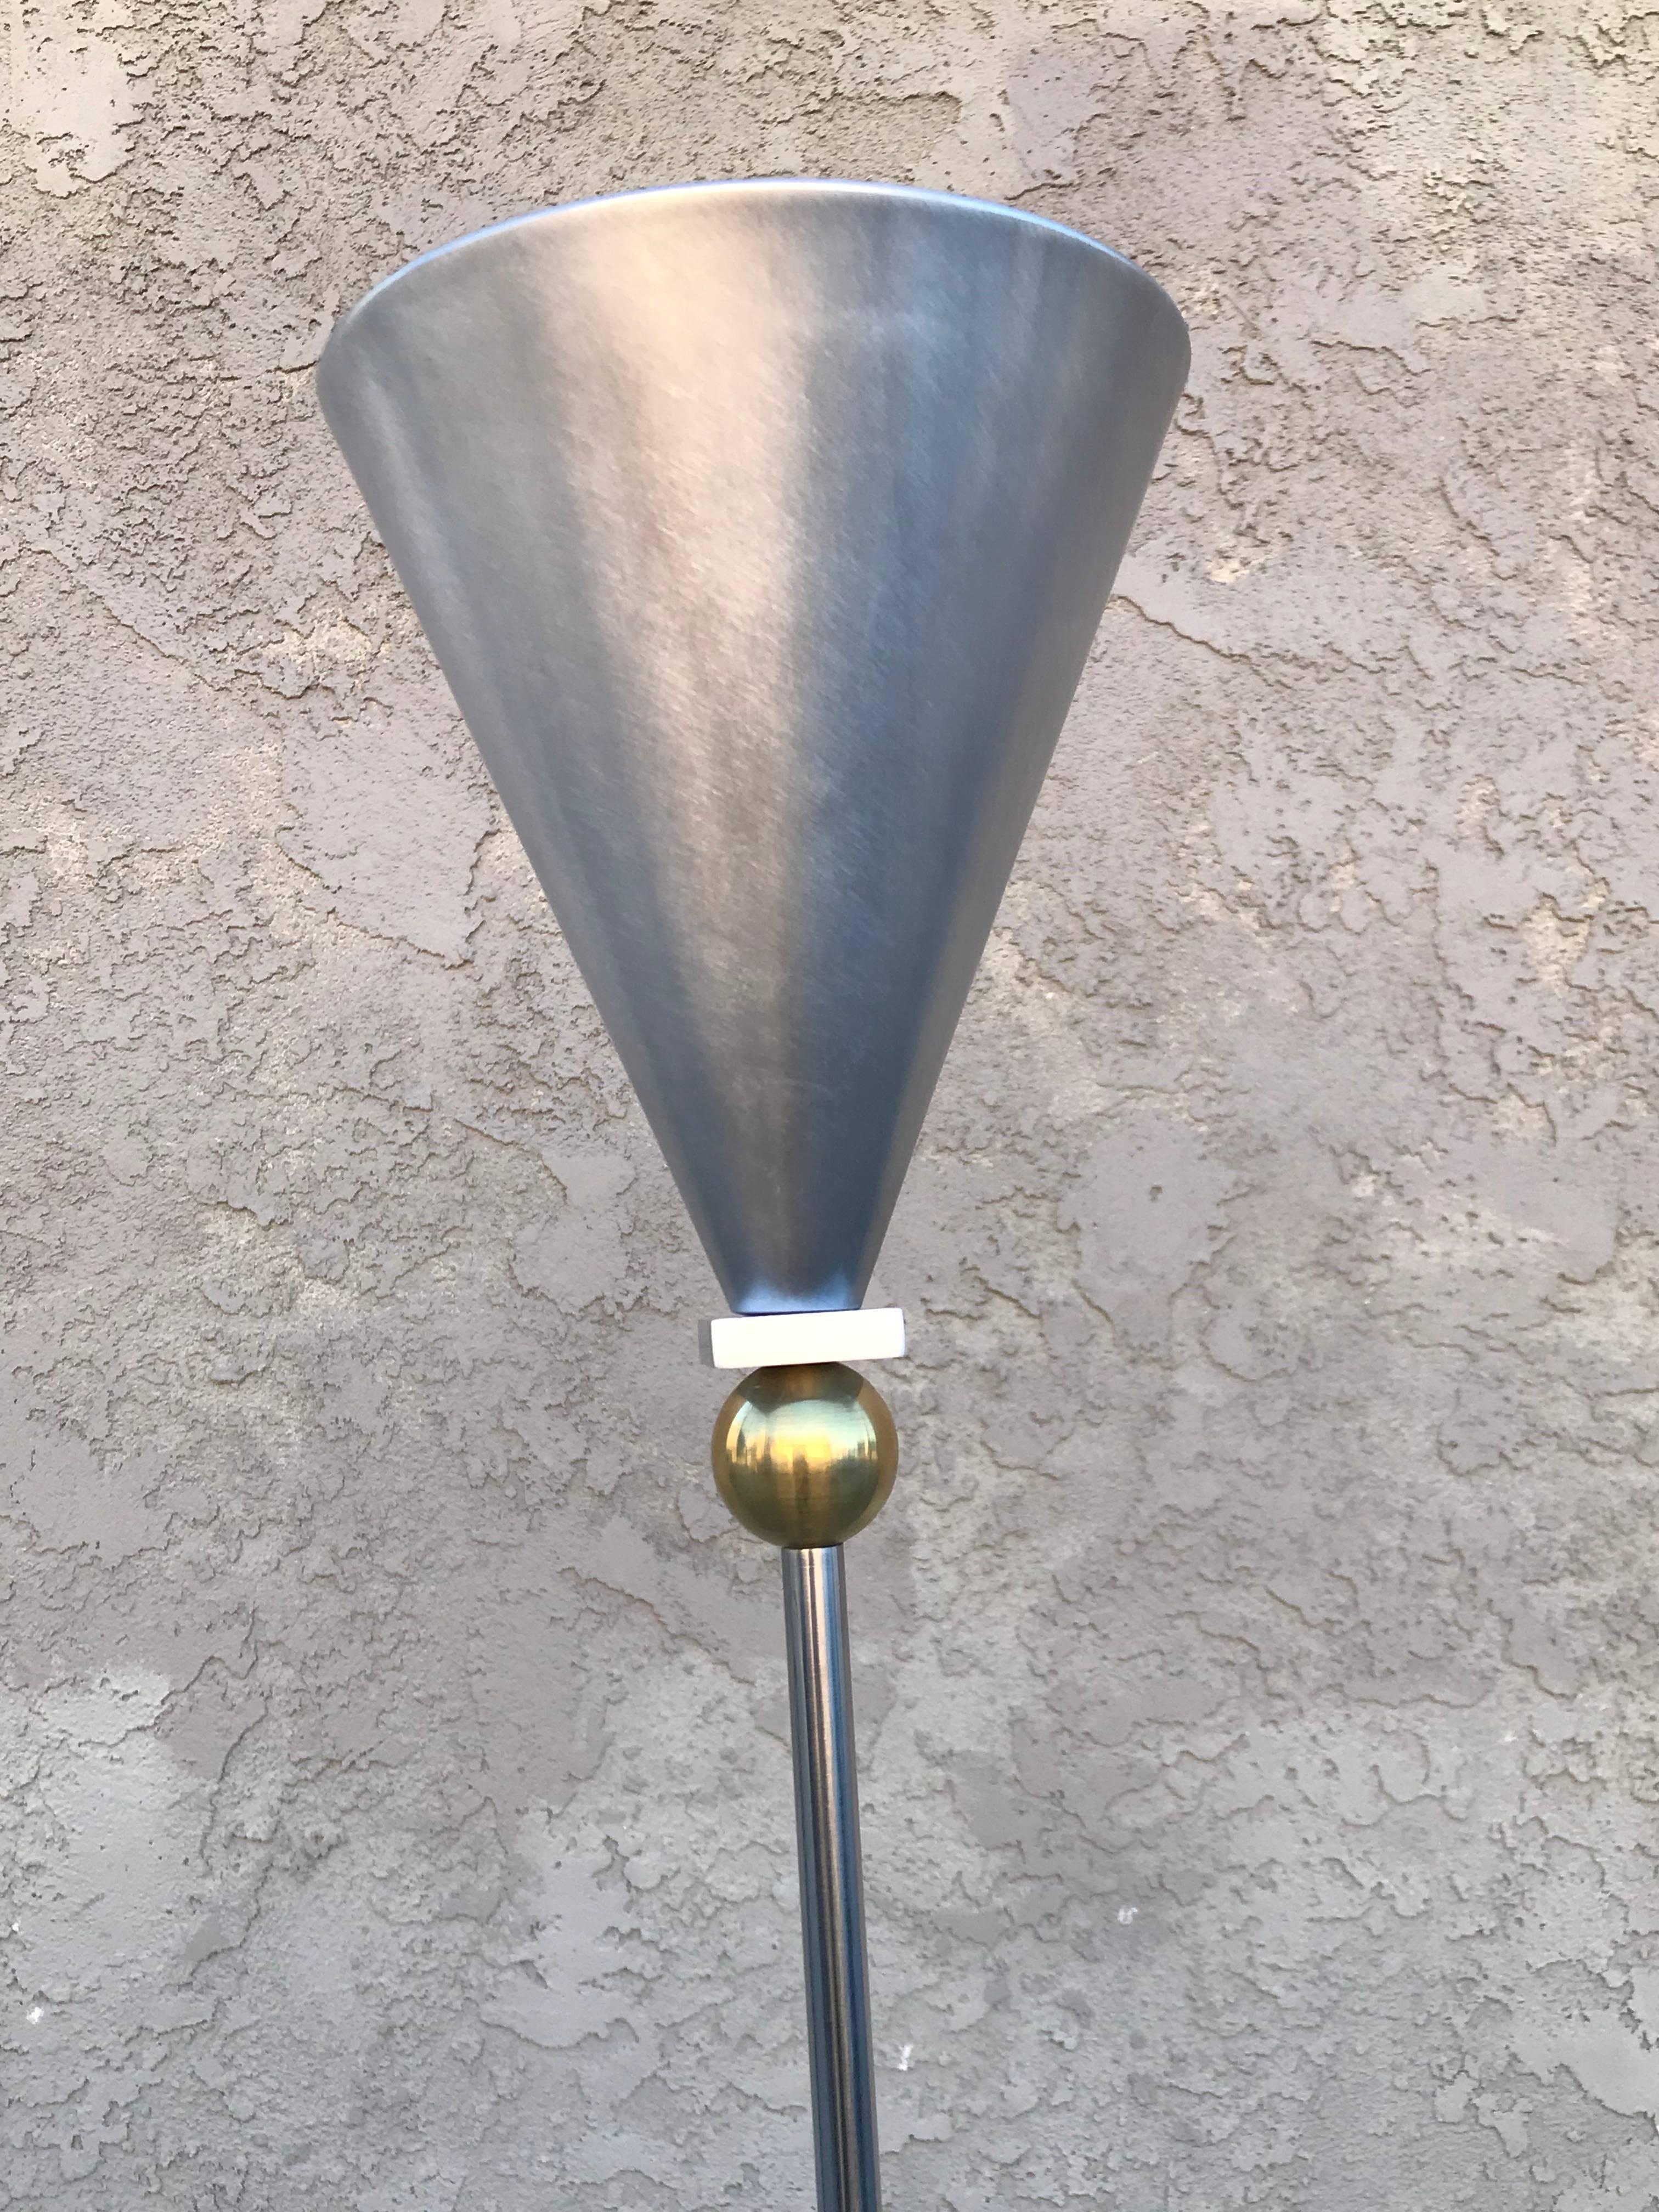 Post-modern floor lamp or torchiere designed by Robert Sonneman for Kovacs. The stem sits on a brass ball floating on a chrome base on both the top and bottom. Aluminium shade and brushed steel base and stem.